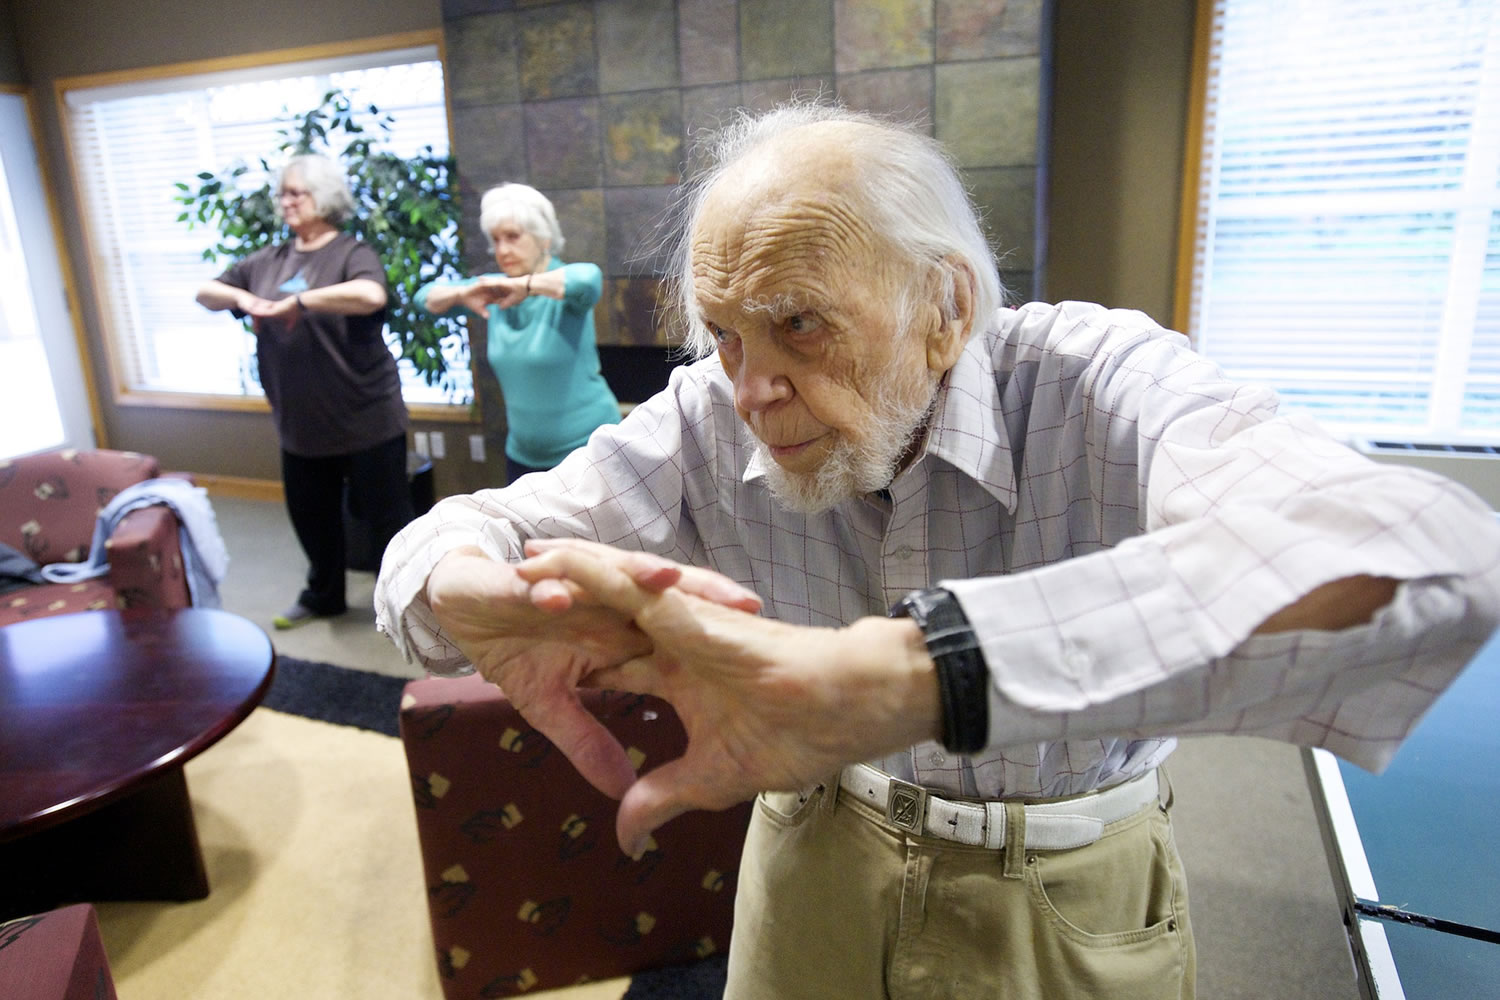 Harris Dusenbery, 100, and other Heritage Place residents take part in their regular workout session earlier this month.